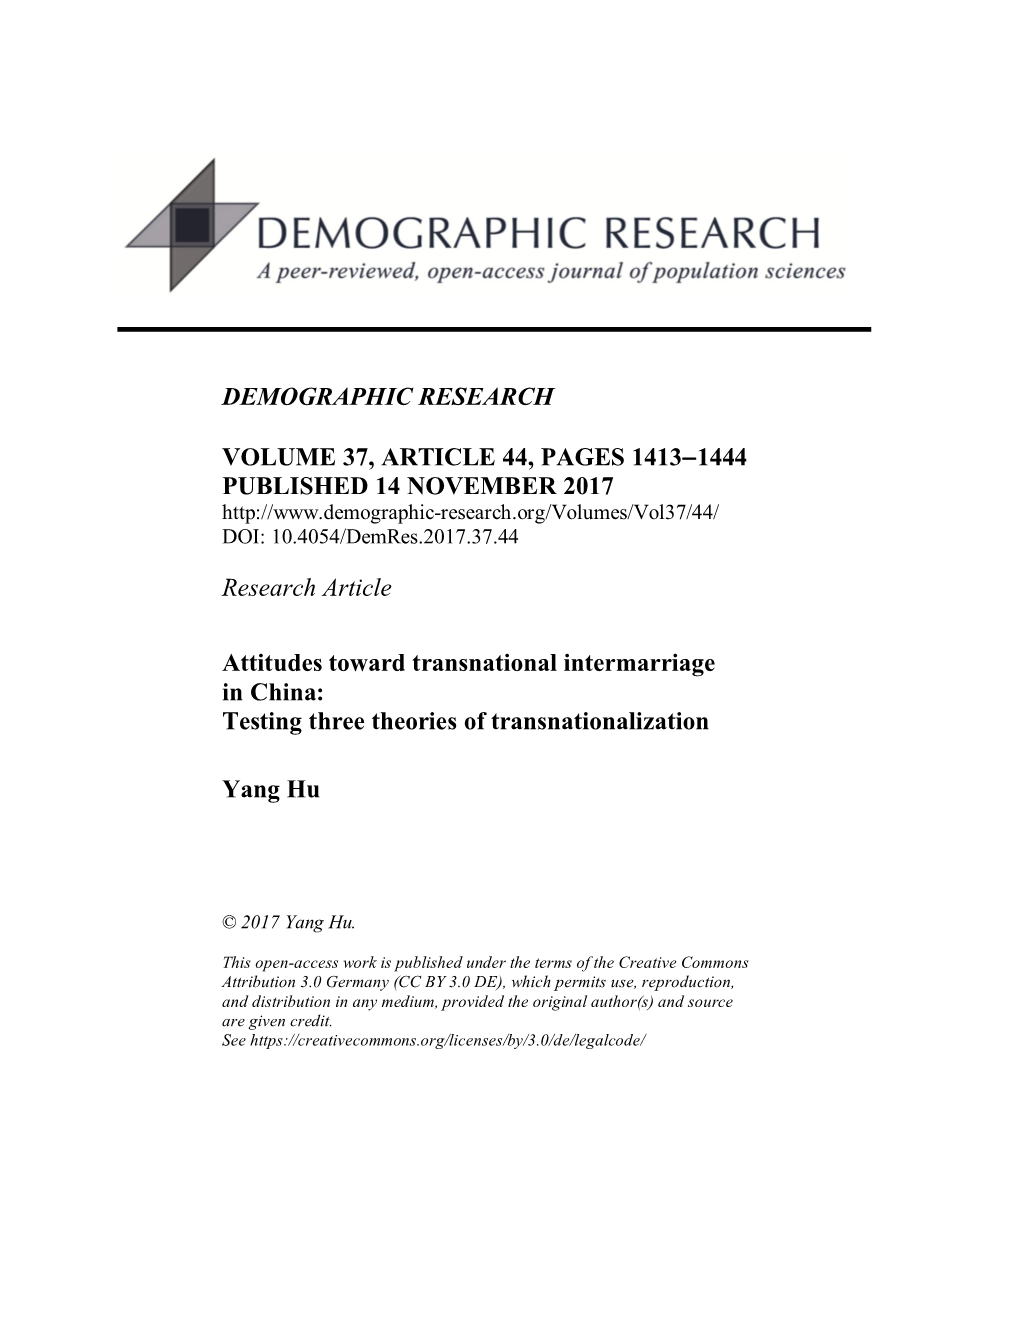 Research Article Attitudes Toward Transnational Intermarriage in China